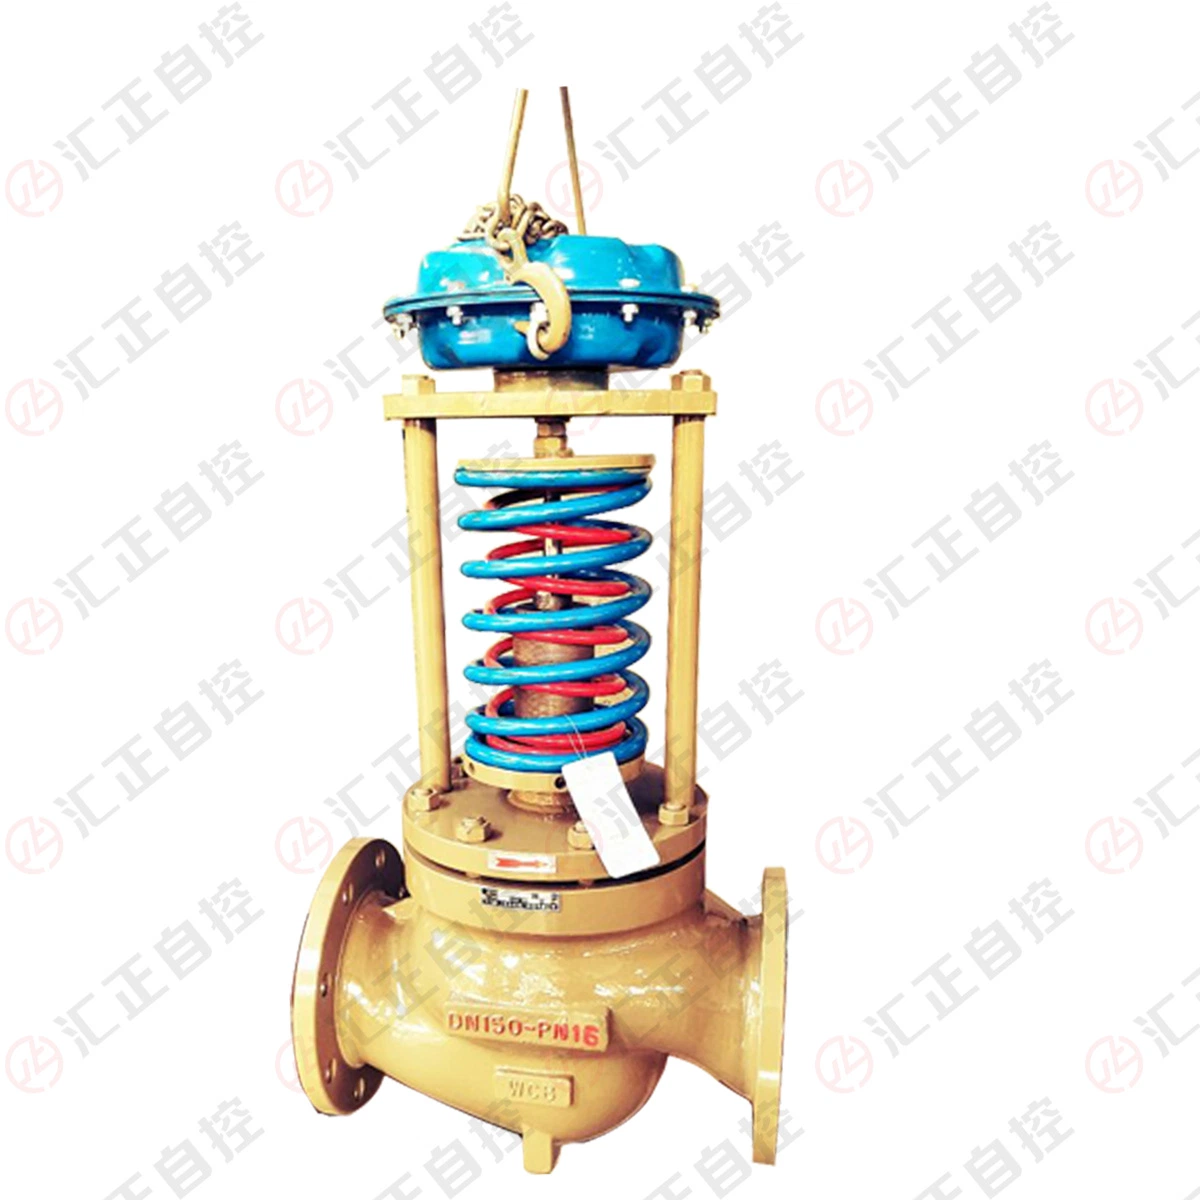 Pneumatic Welding End Stainless Steel Self-Operated Regulate Valve